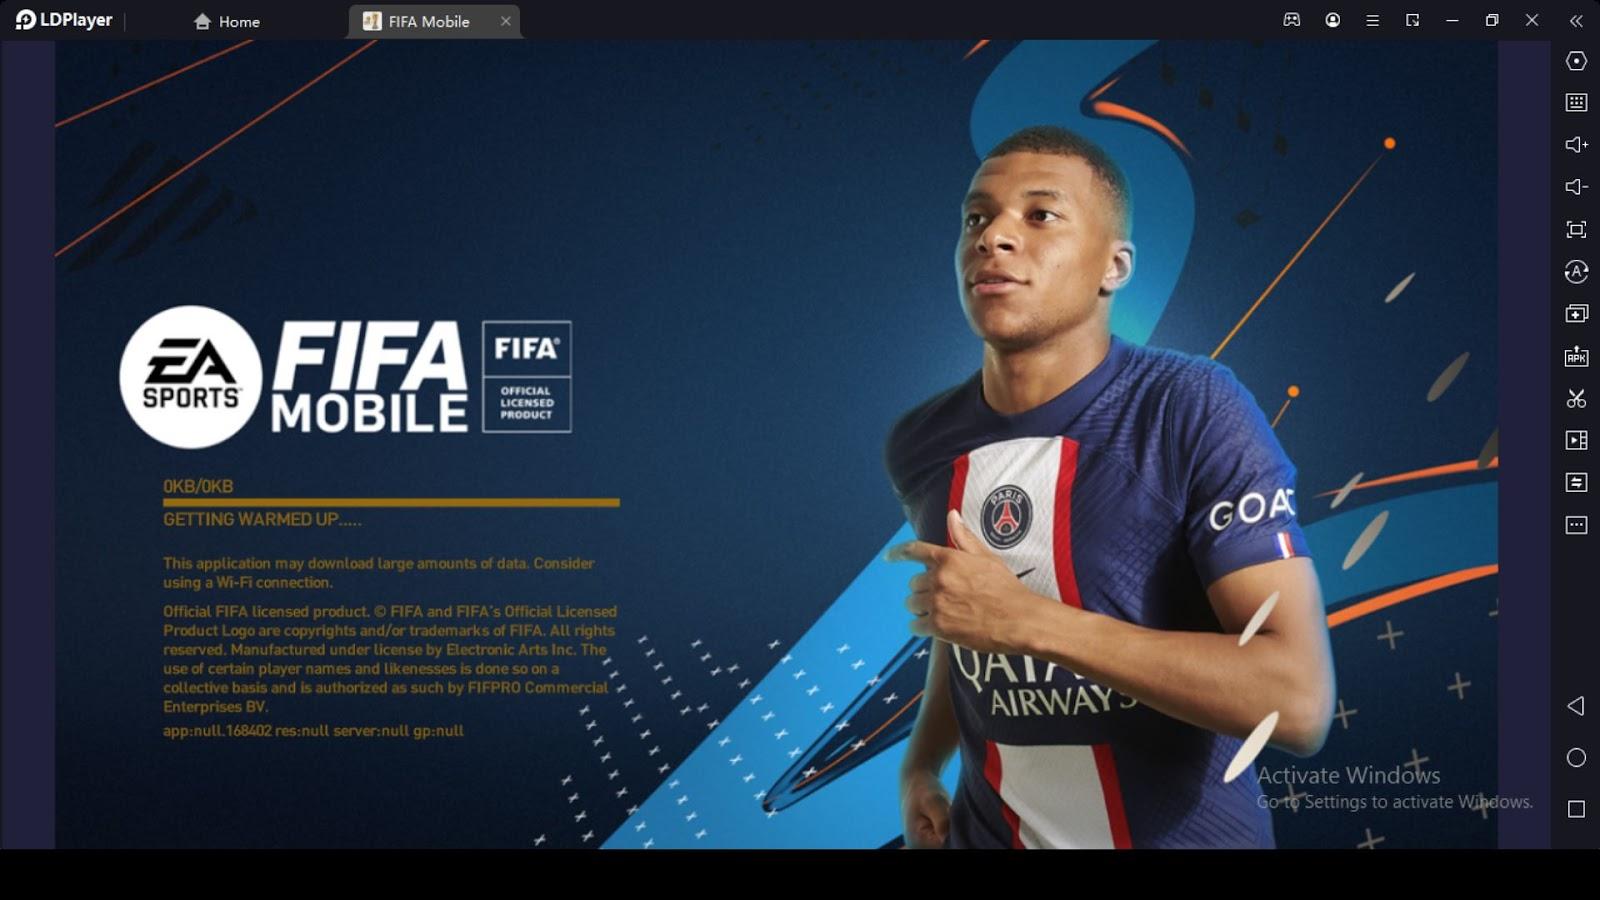 EA SPORTS FIFA World Cup 2022™ Beginner Guide to Get Ready for Your